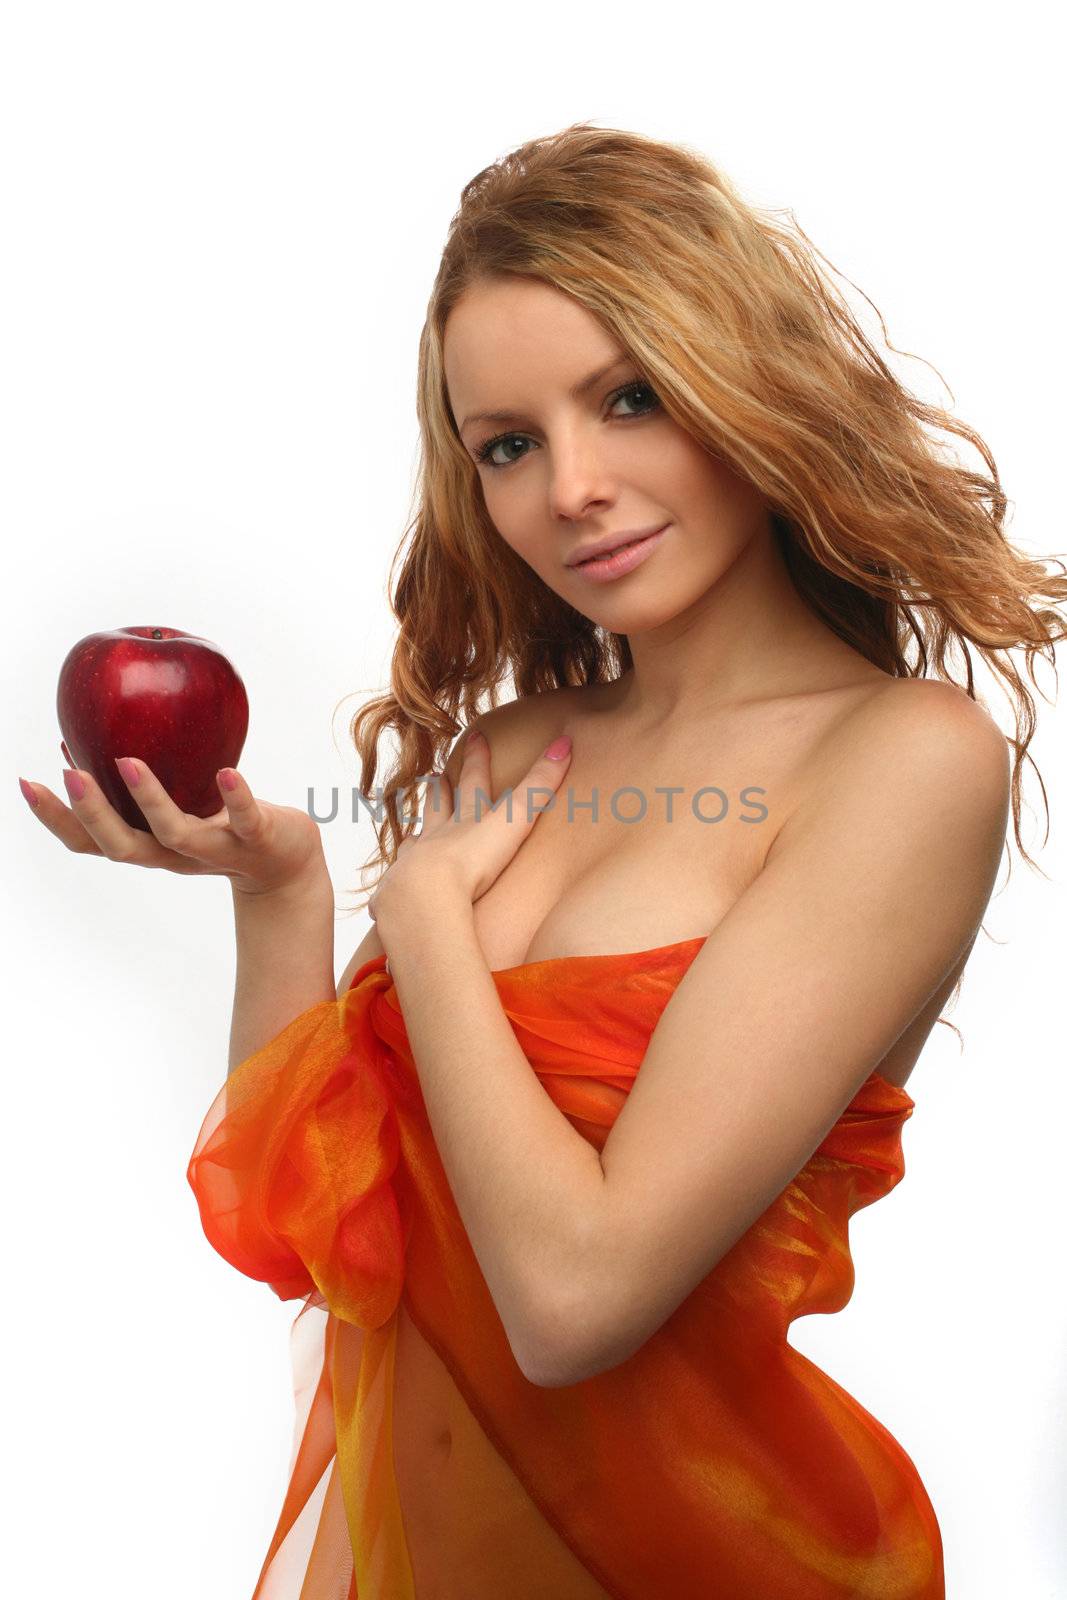 girl holding in her hand a red apple by skutin